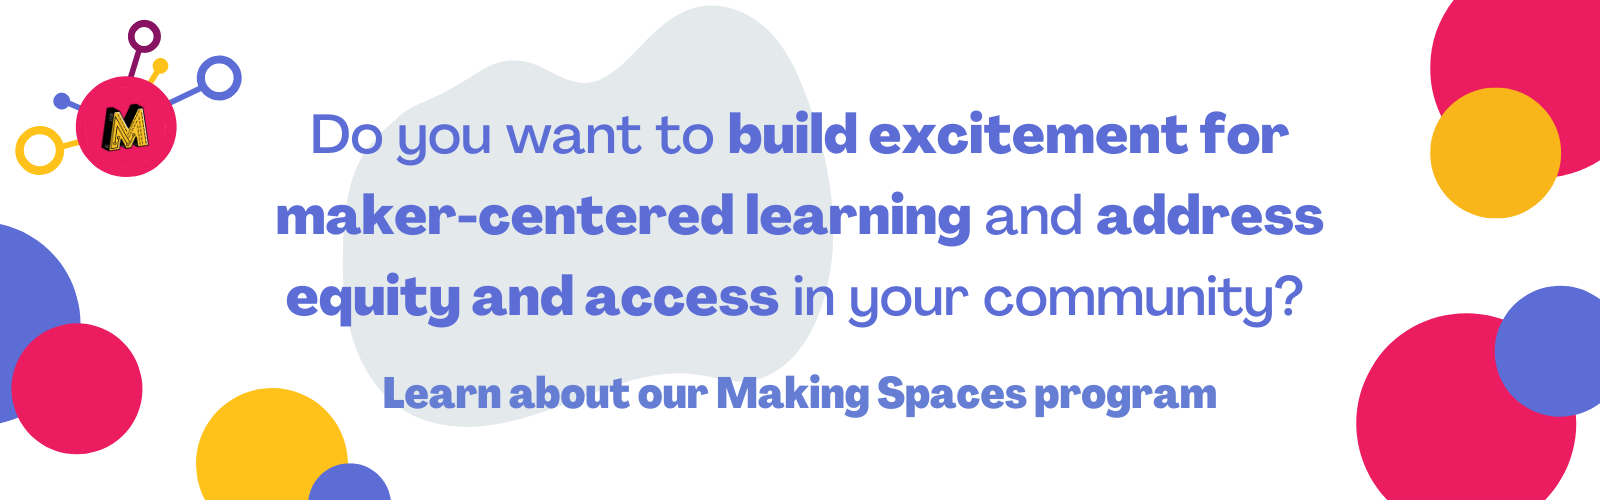 Do you want to build excitement for maker-centered learning and address equity and access in your community? Learn about our Making Spaces program